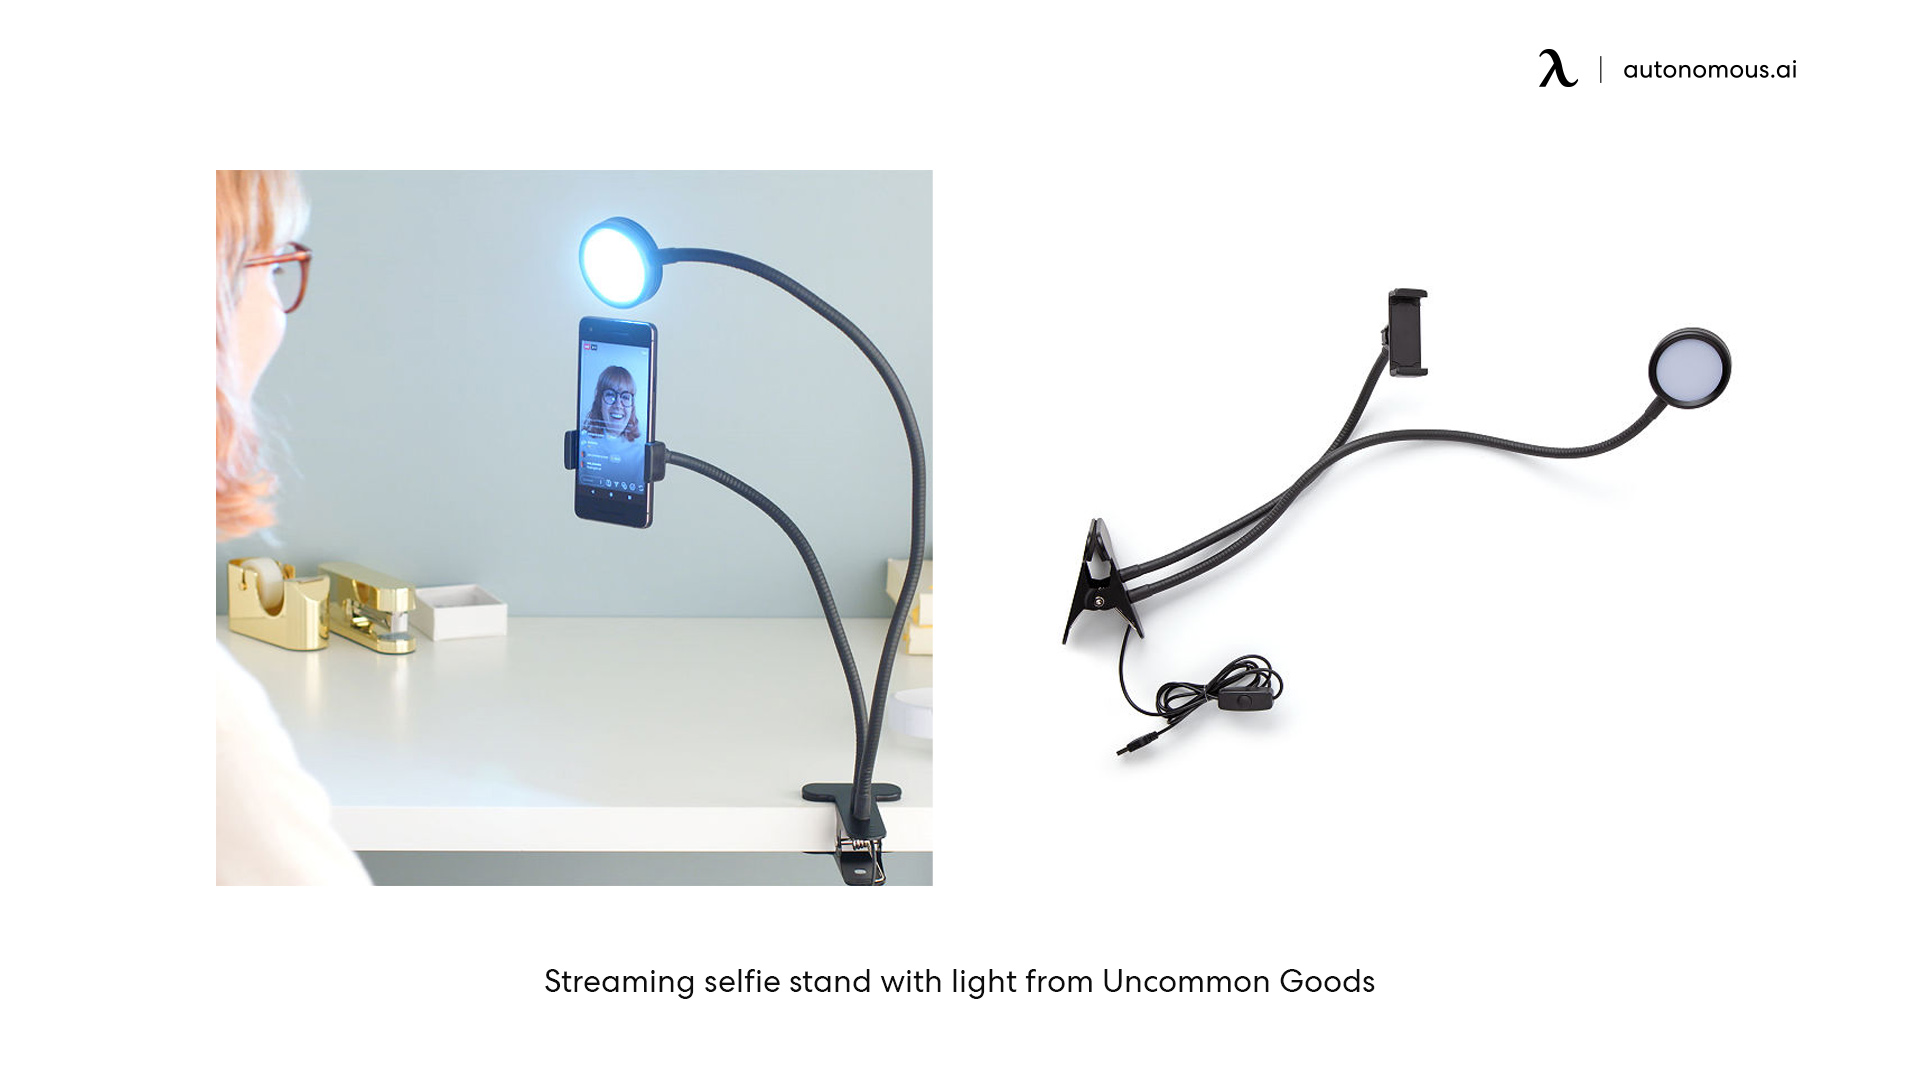 Streaming selfie stand with light from Uncommon Goods